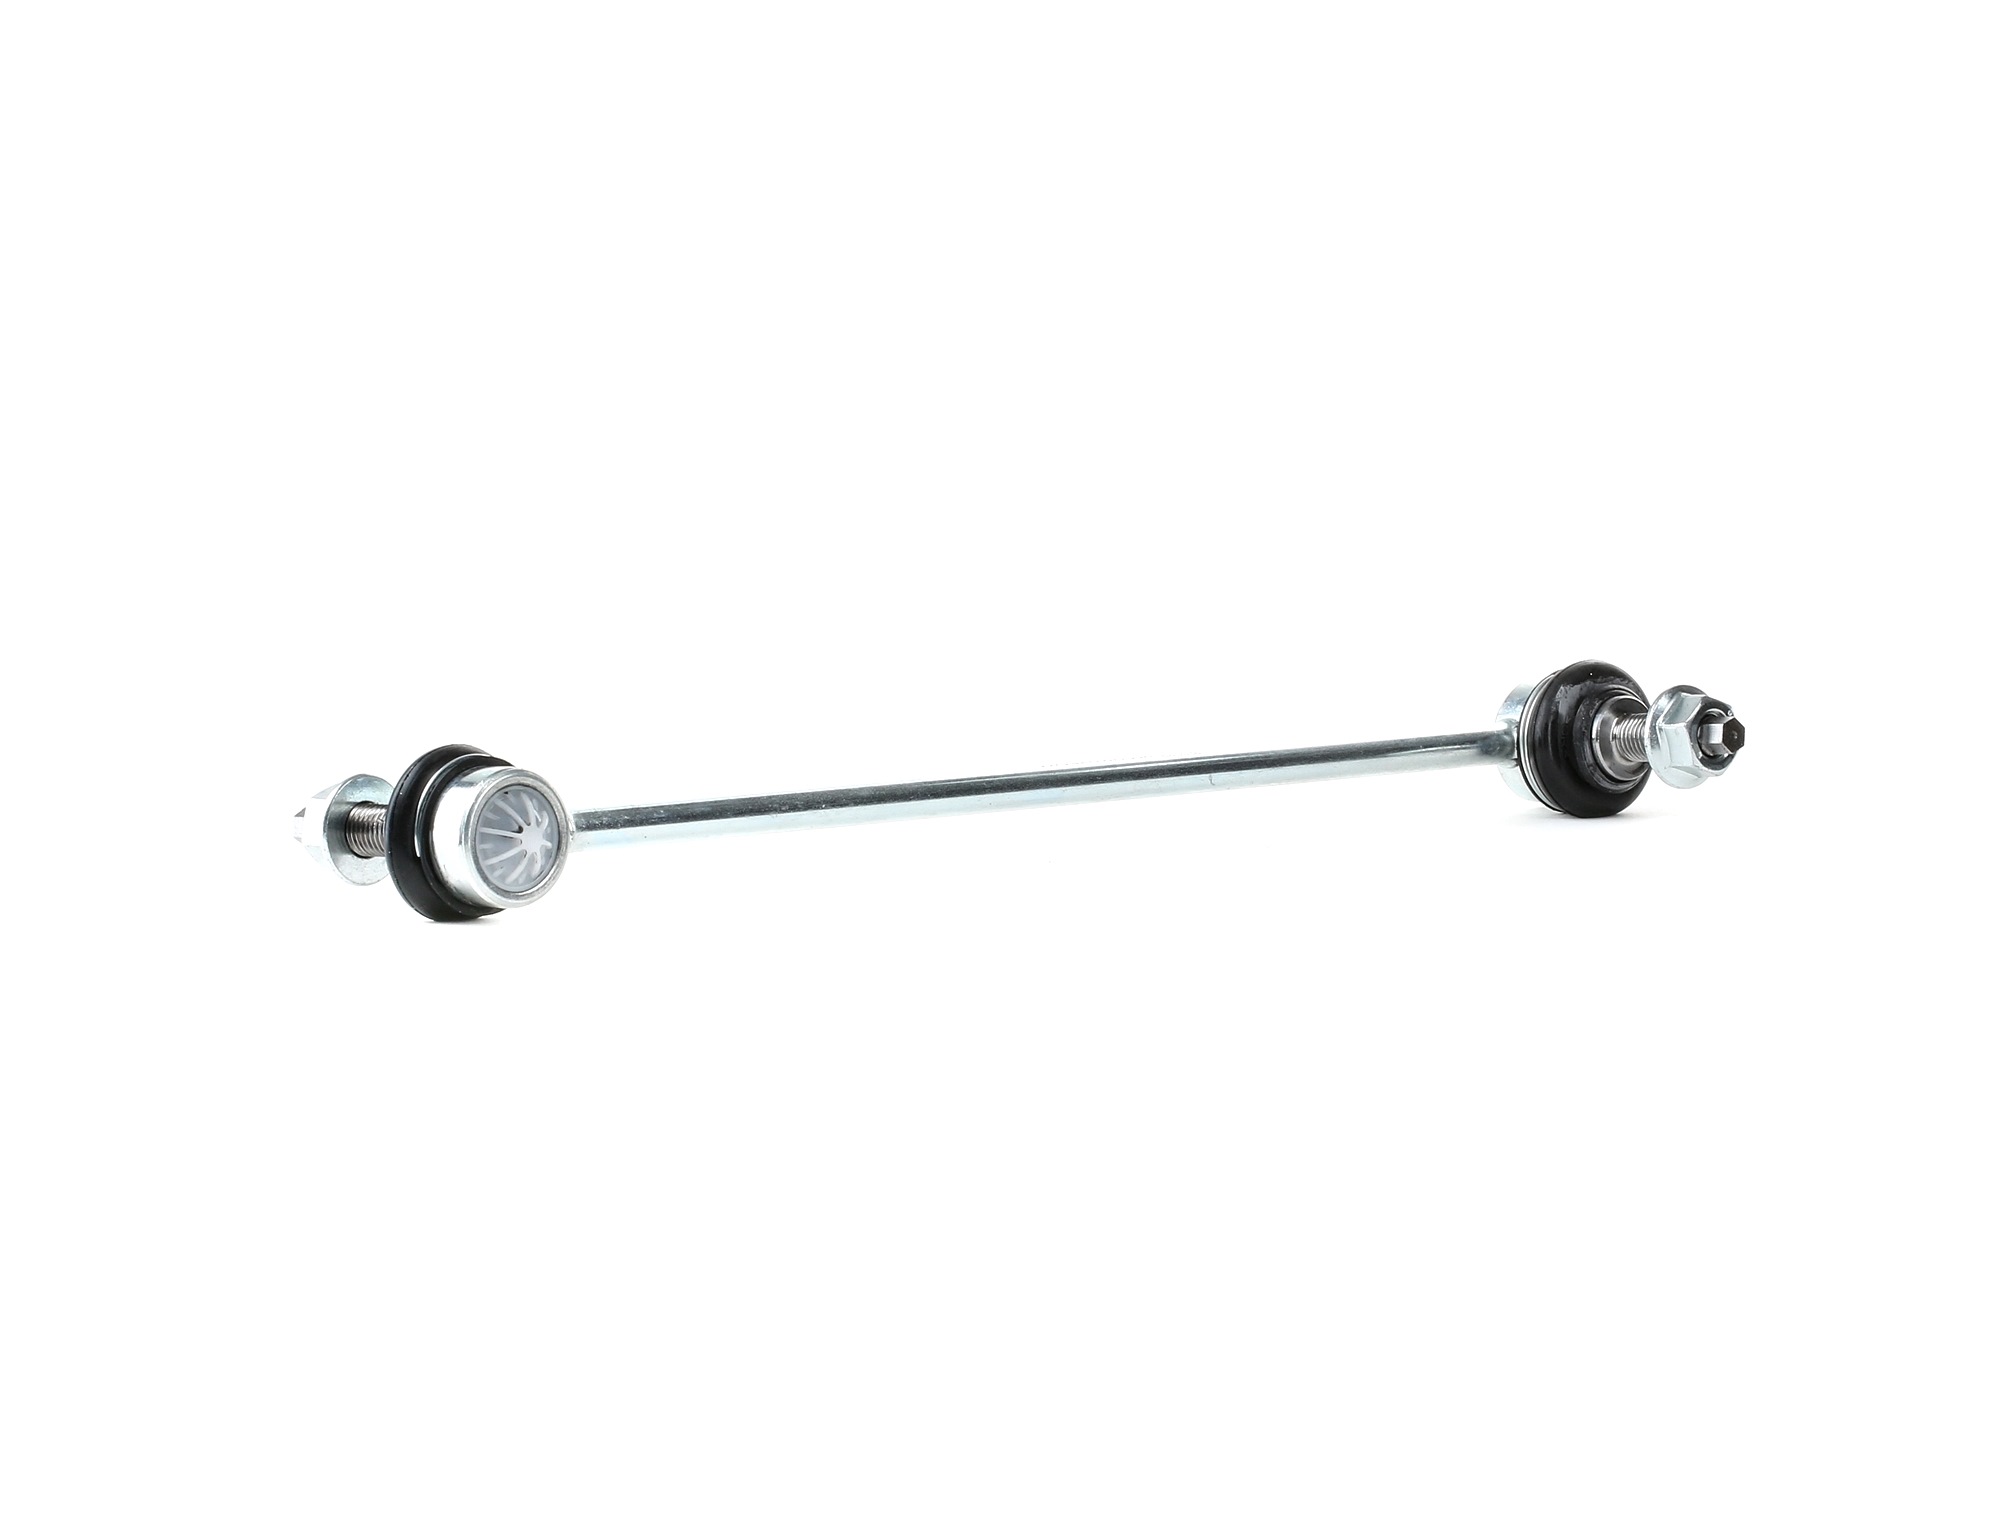 Mercedes-Benz Anti-roll bar link SKF VKDS 348014 at a good price